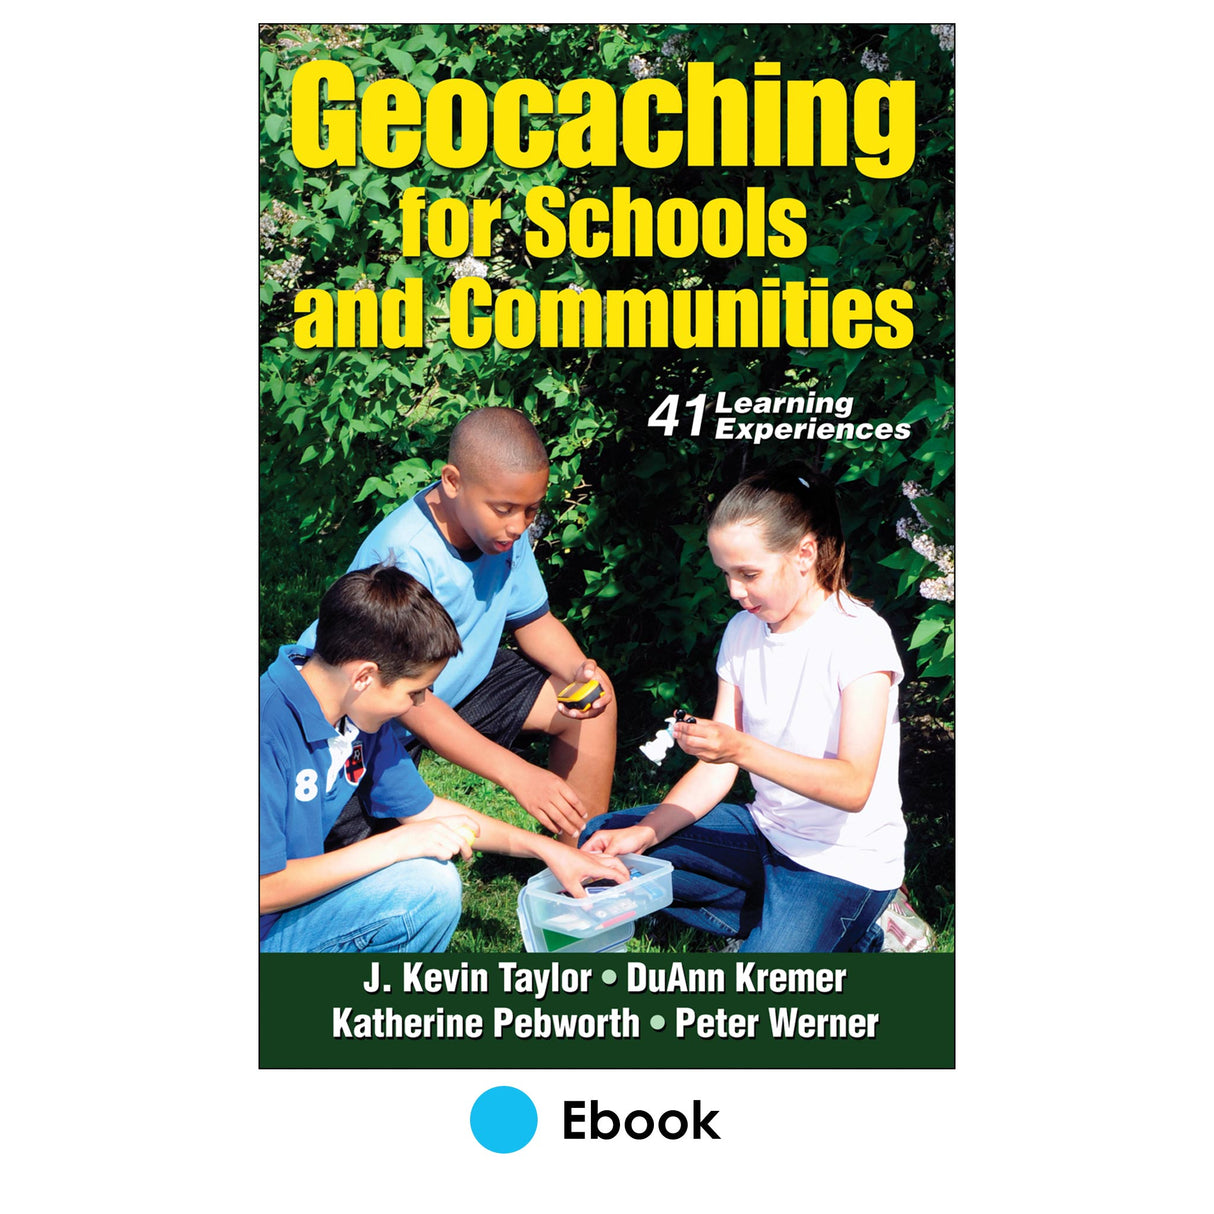 Geocaching for Schools and Communities PDF